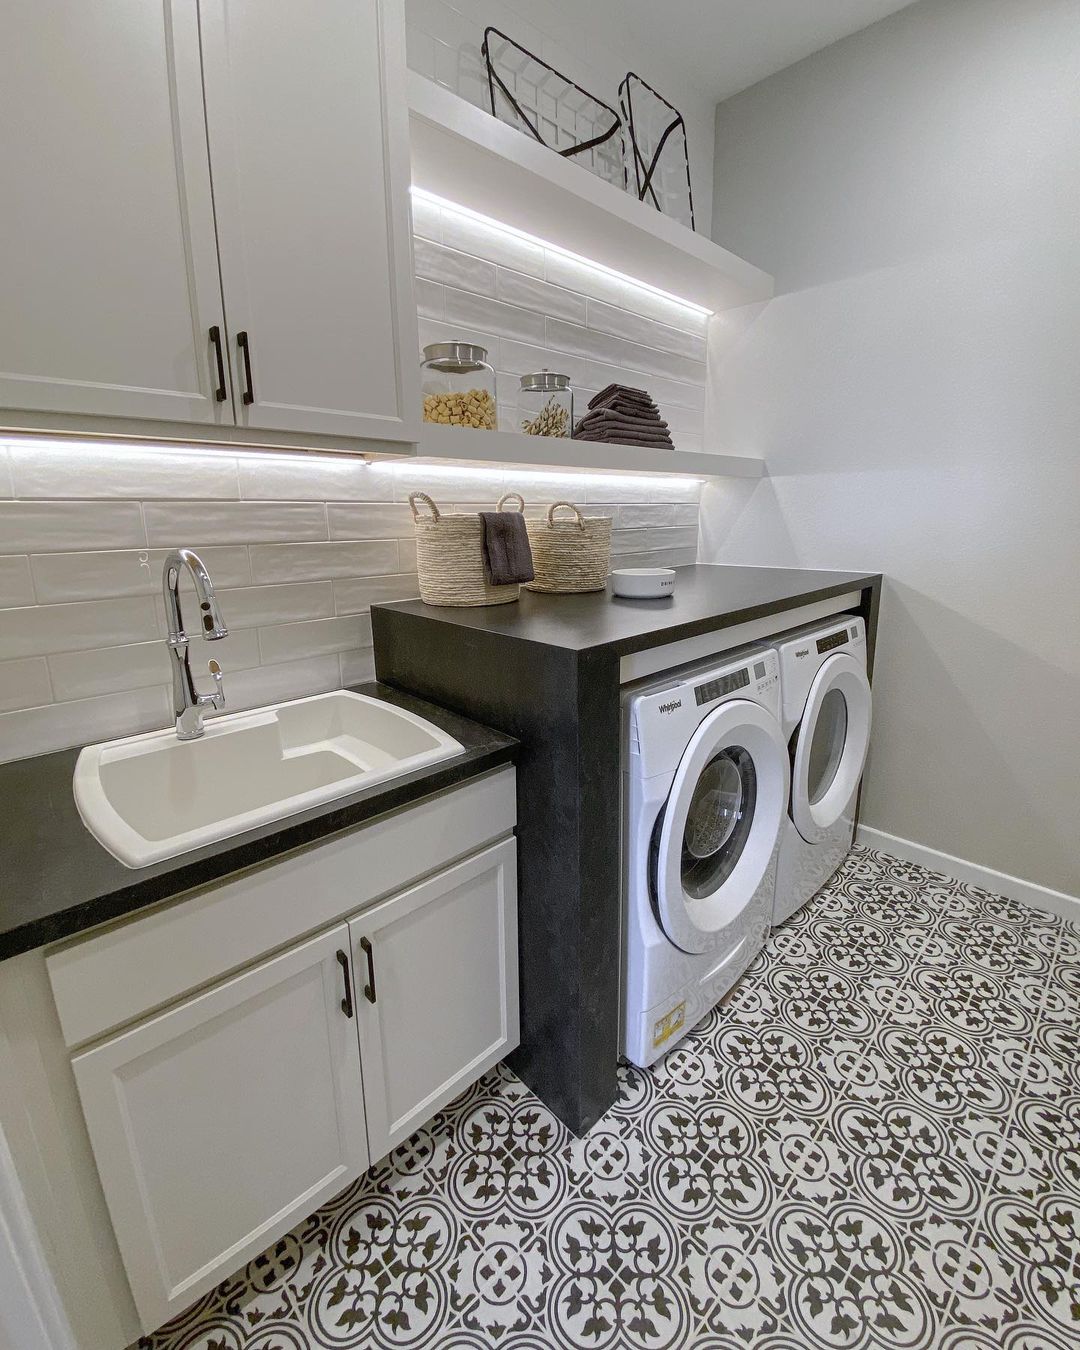 one way to maximize space in your long narrow laundry room is to be smart about incorporating lighting in awkward or difficult to reach spots such as under wall cabinets and shelves.